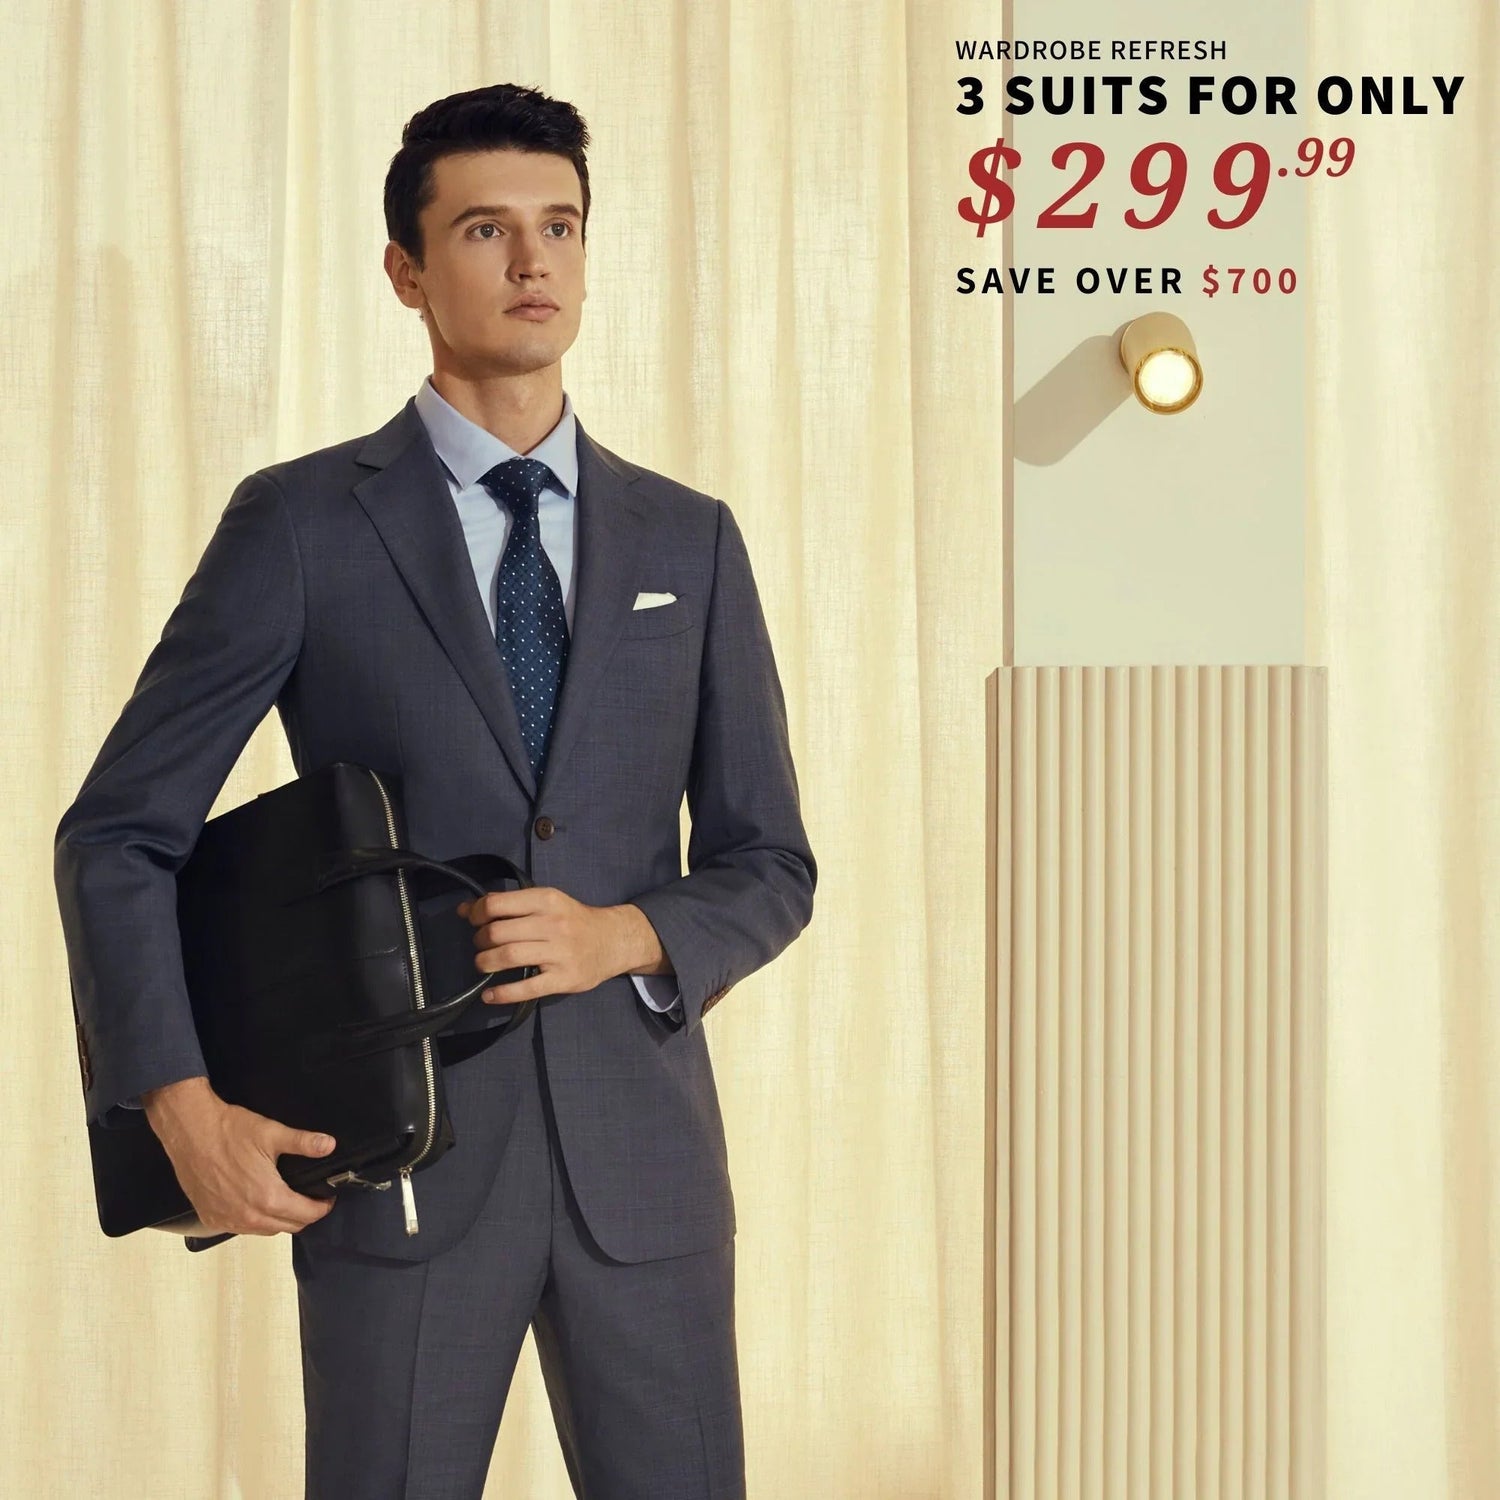 3 Suits for $299